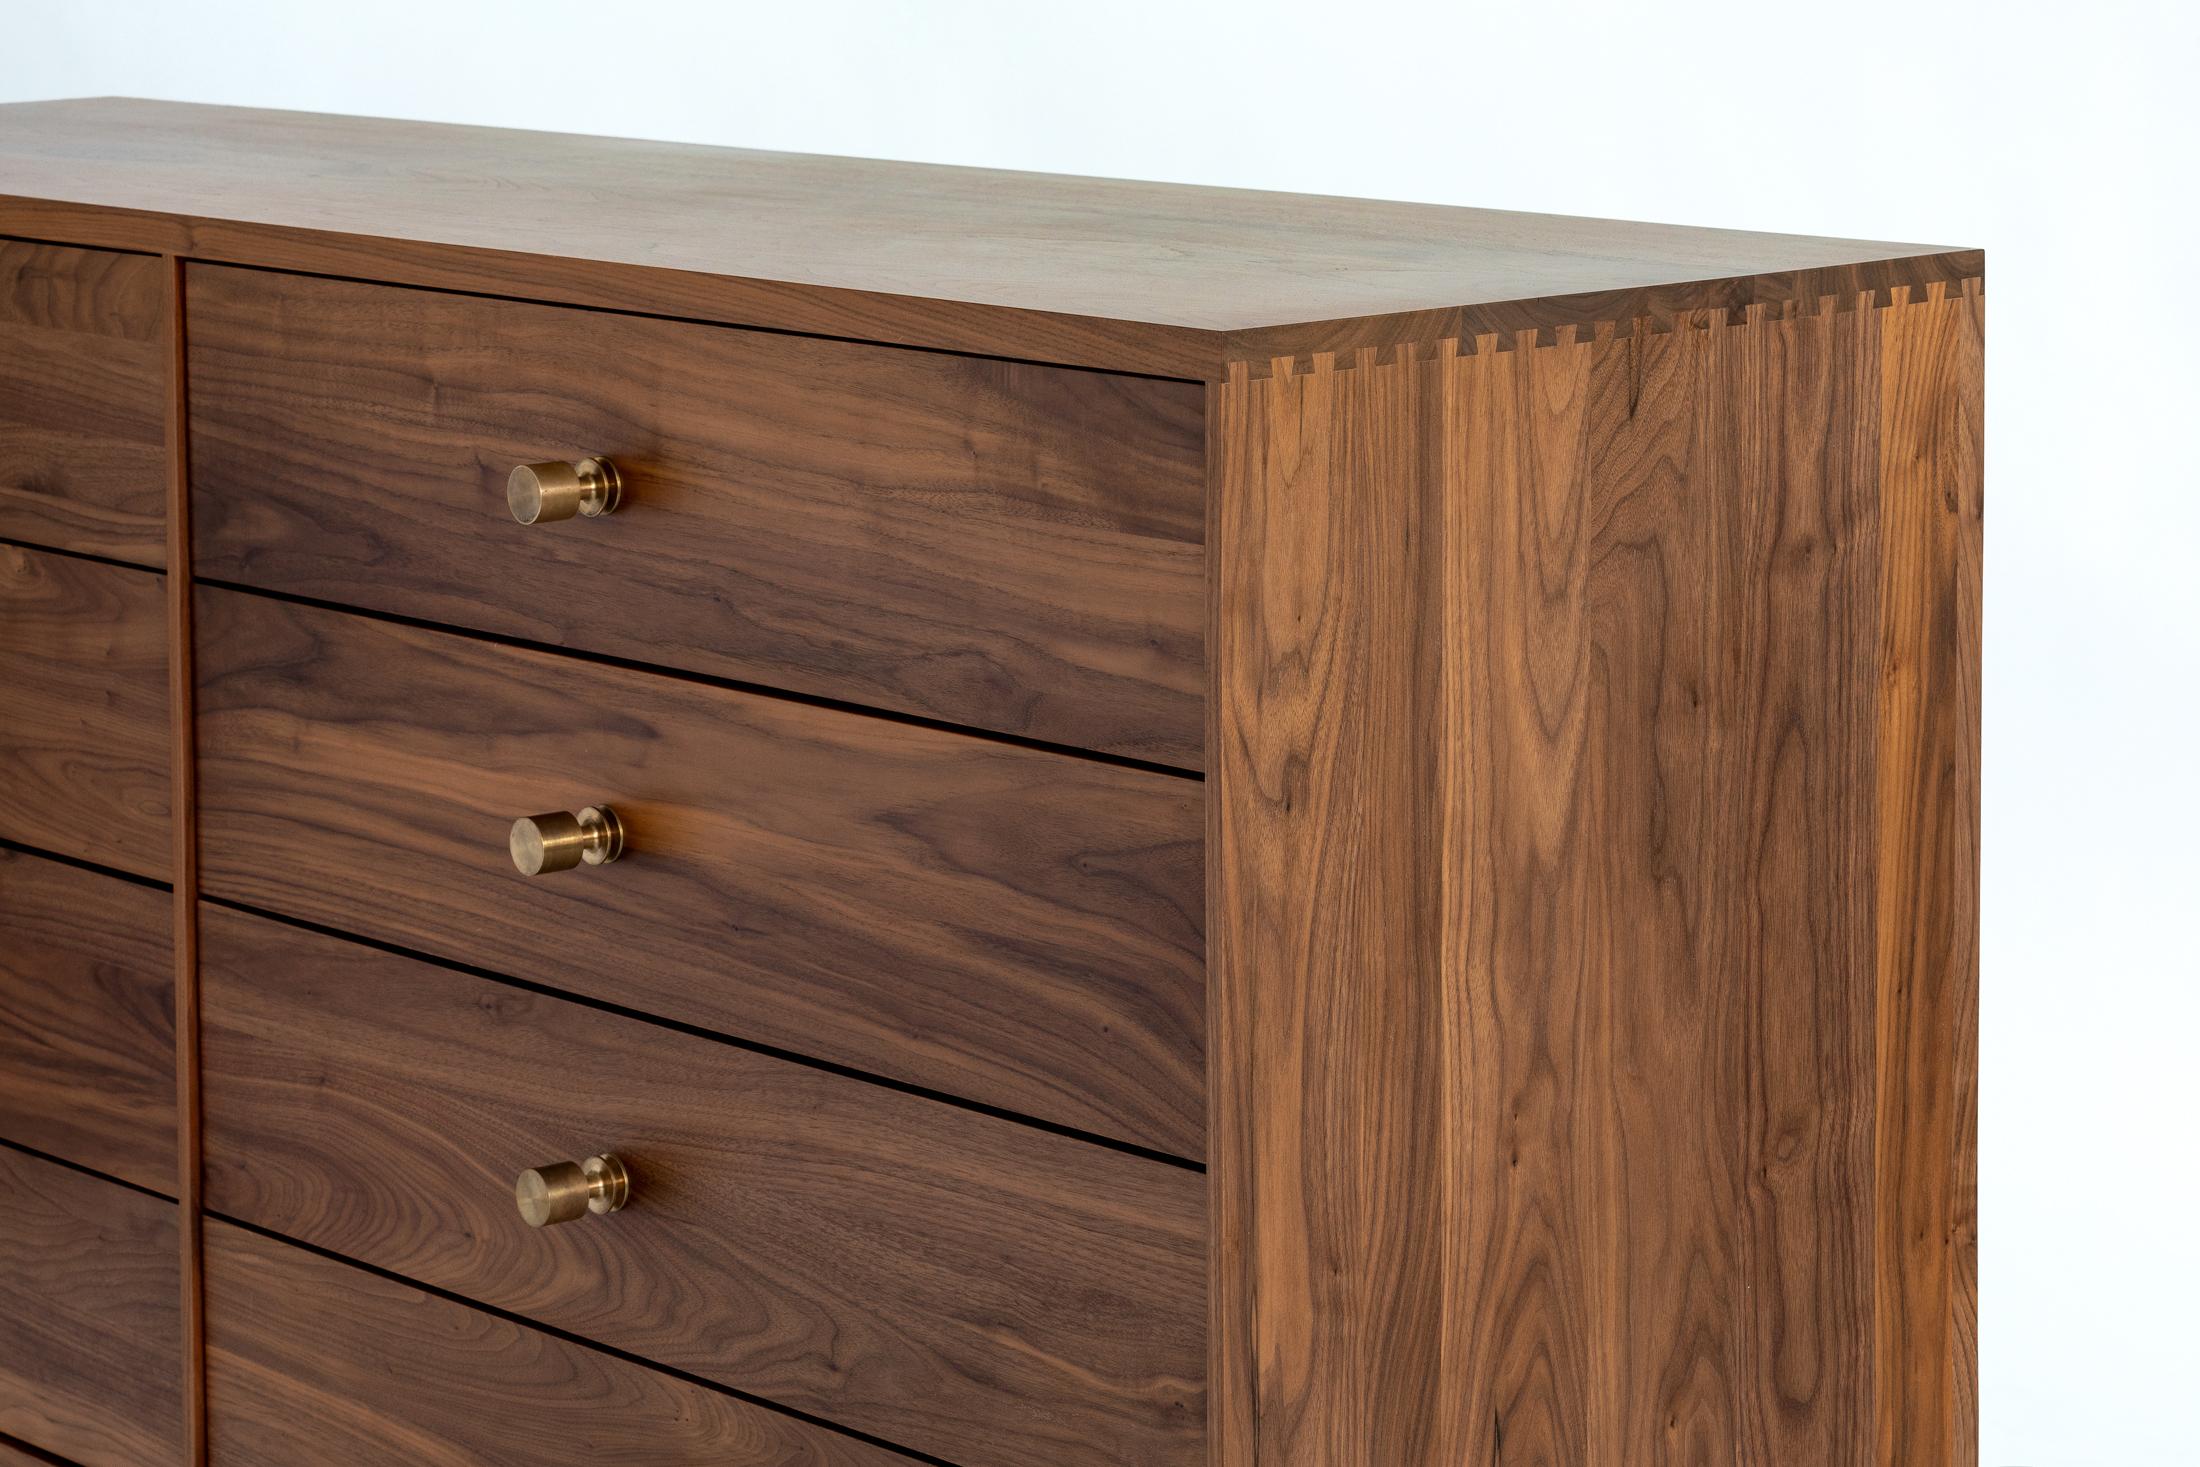 This handmade credenza or dresser console features bronze pulls, dovetail joinery and a blackened steel base. The AC11 stands with confidence and adds elegance to any work or living environment.

Shown in solid walnut, with a blackened steel base